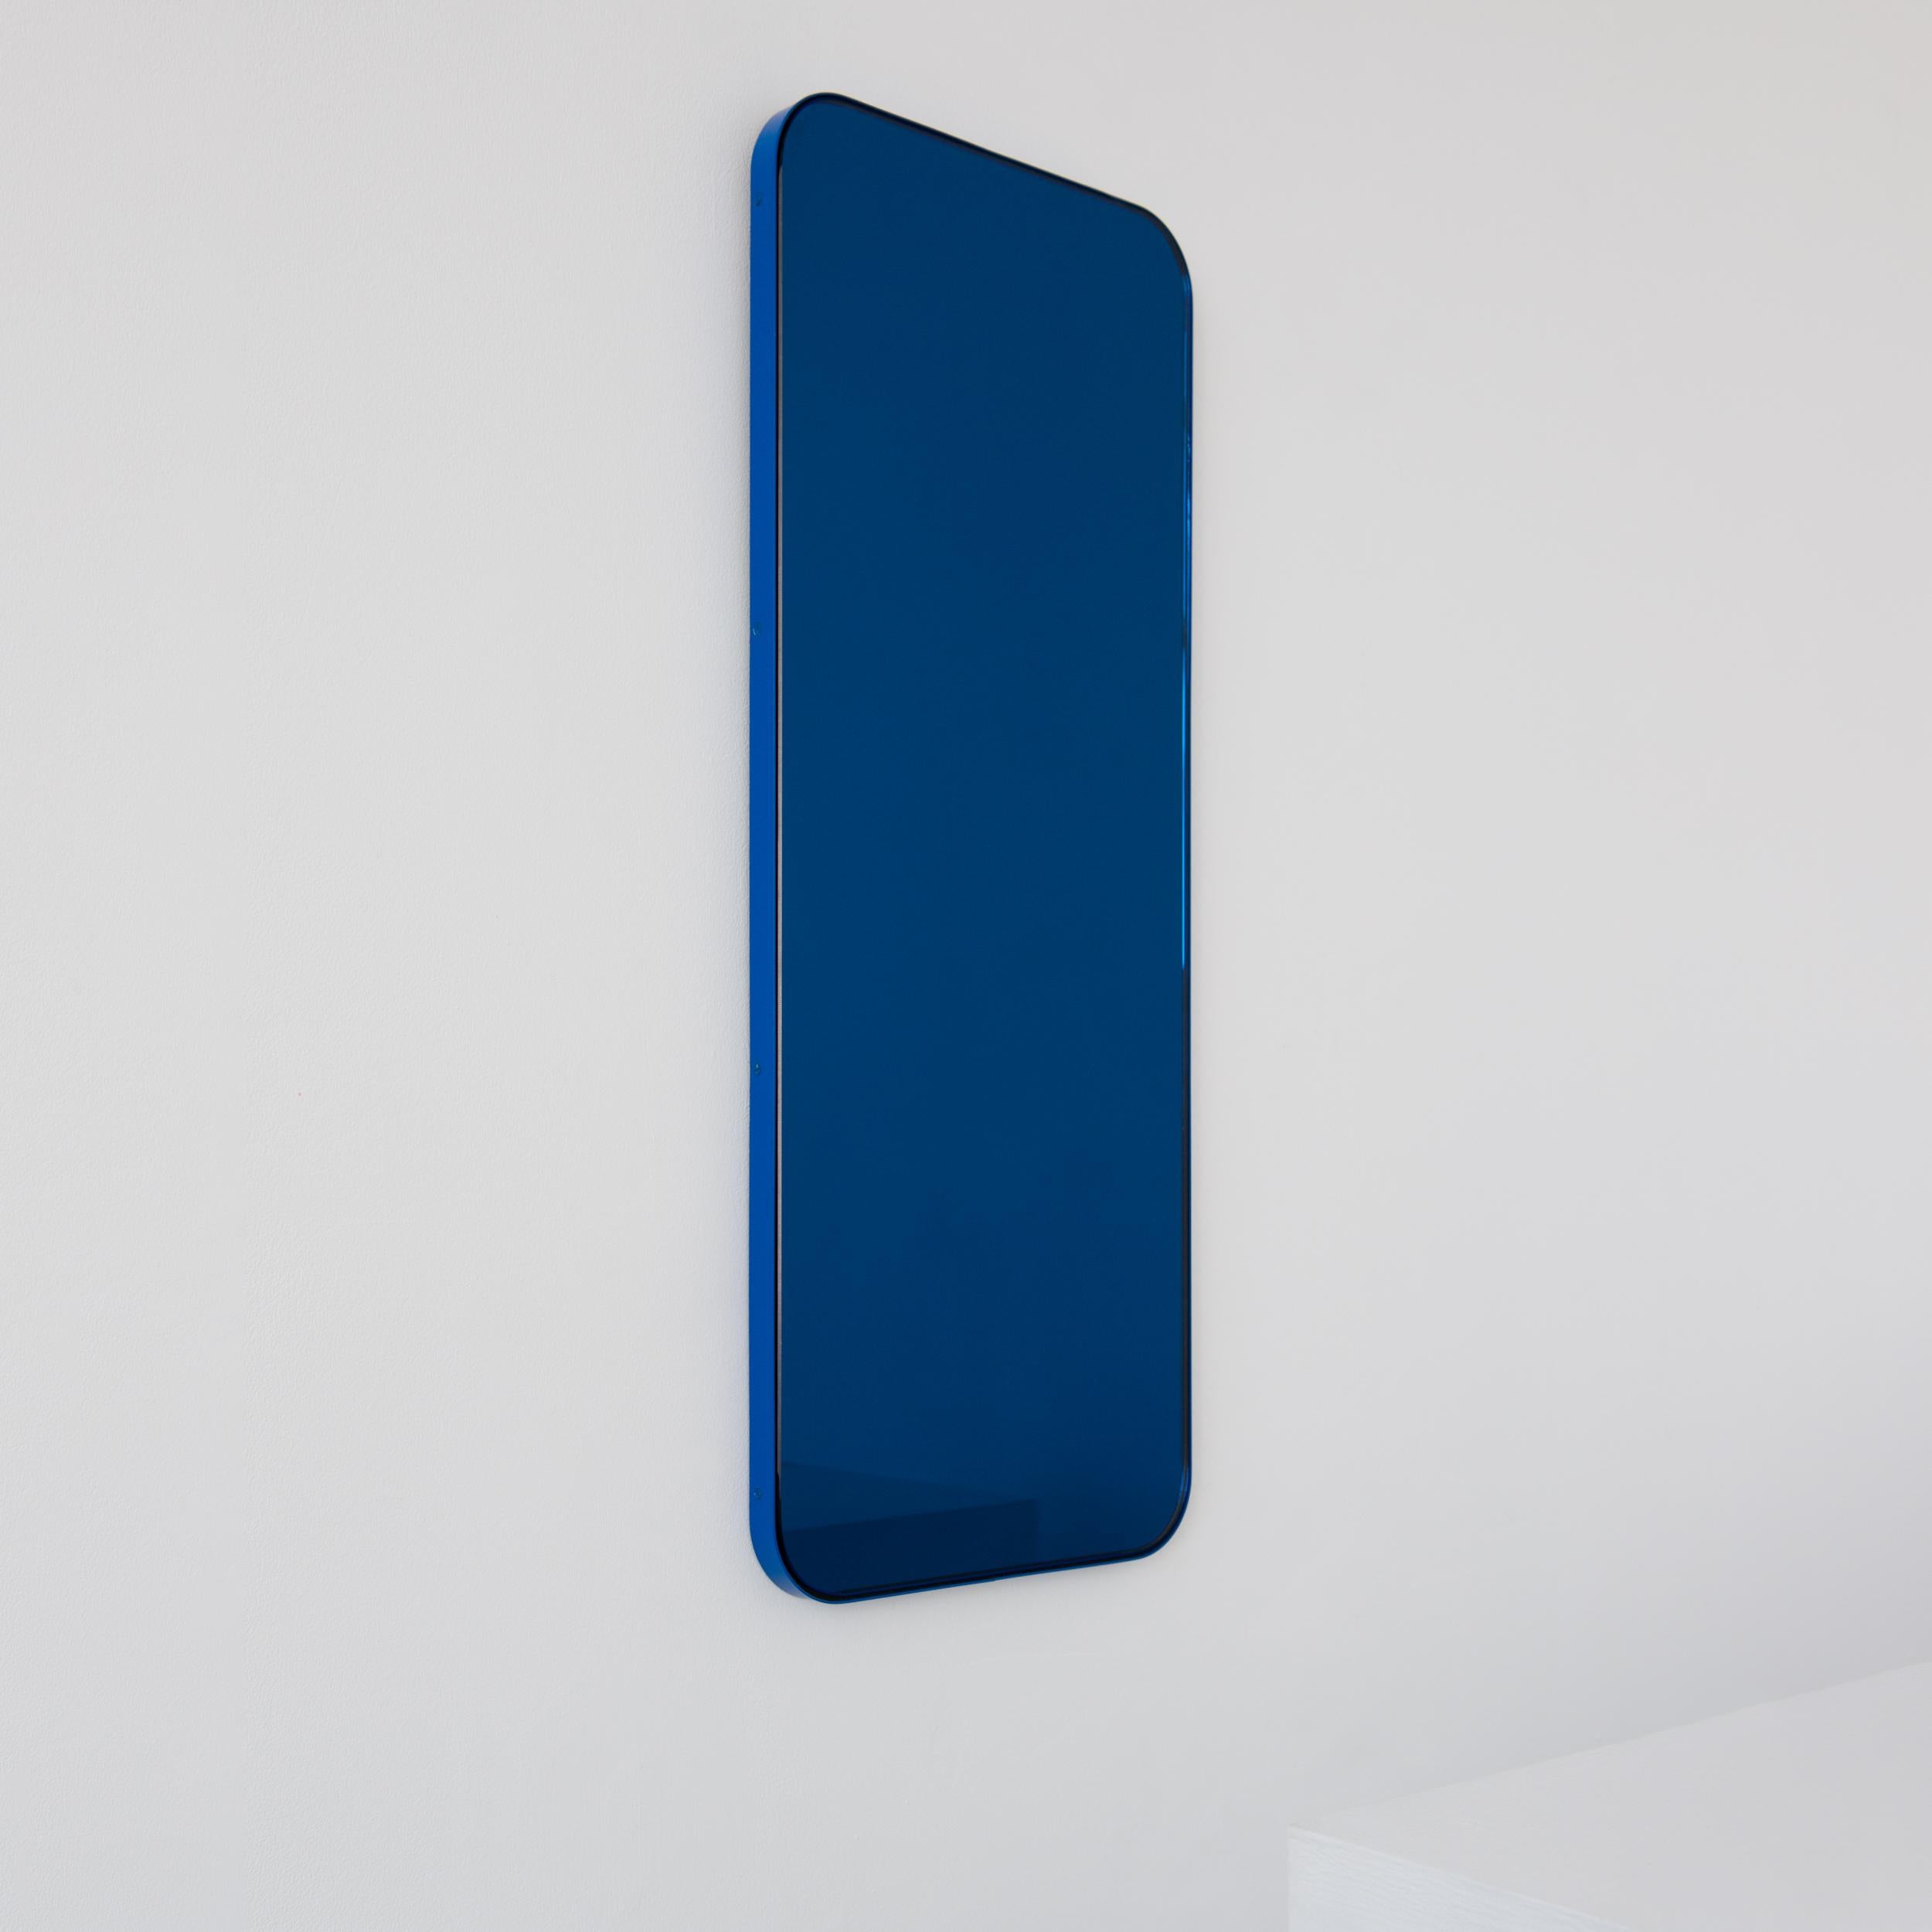 Aluminum Quadris Rectangular Contemporary Blue Tinted Mirror with a Blue Frame, Large For Sale